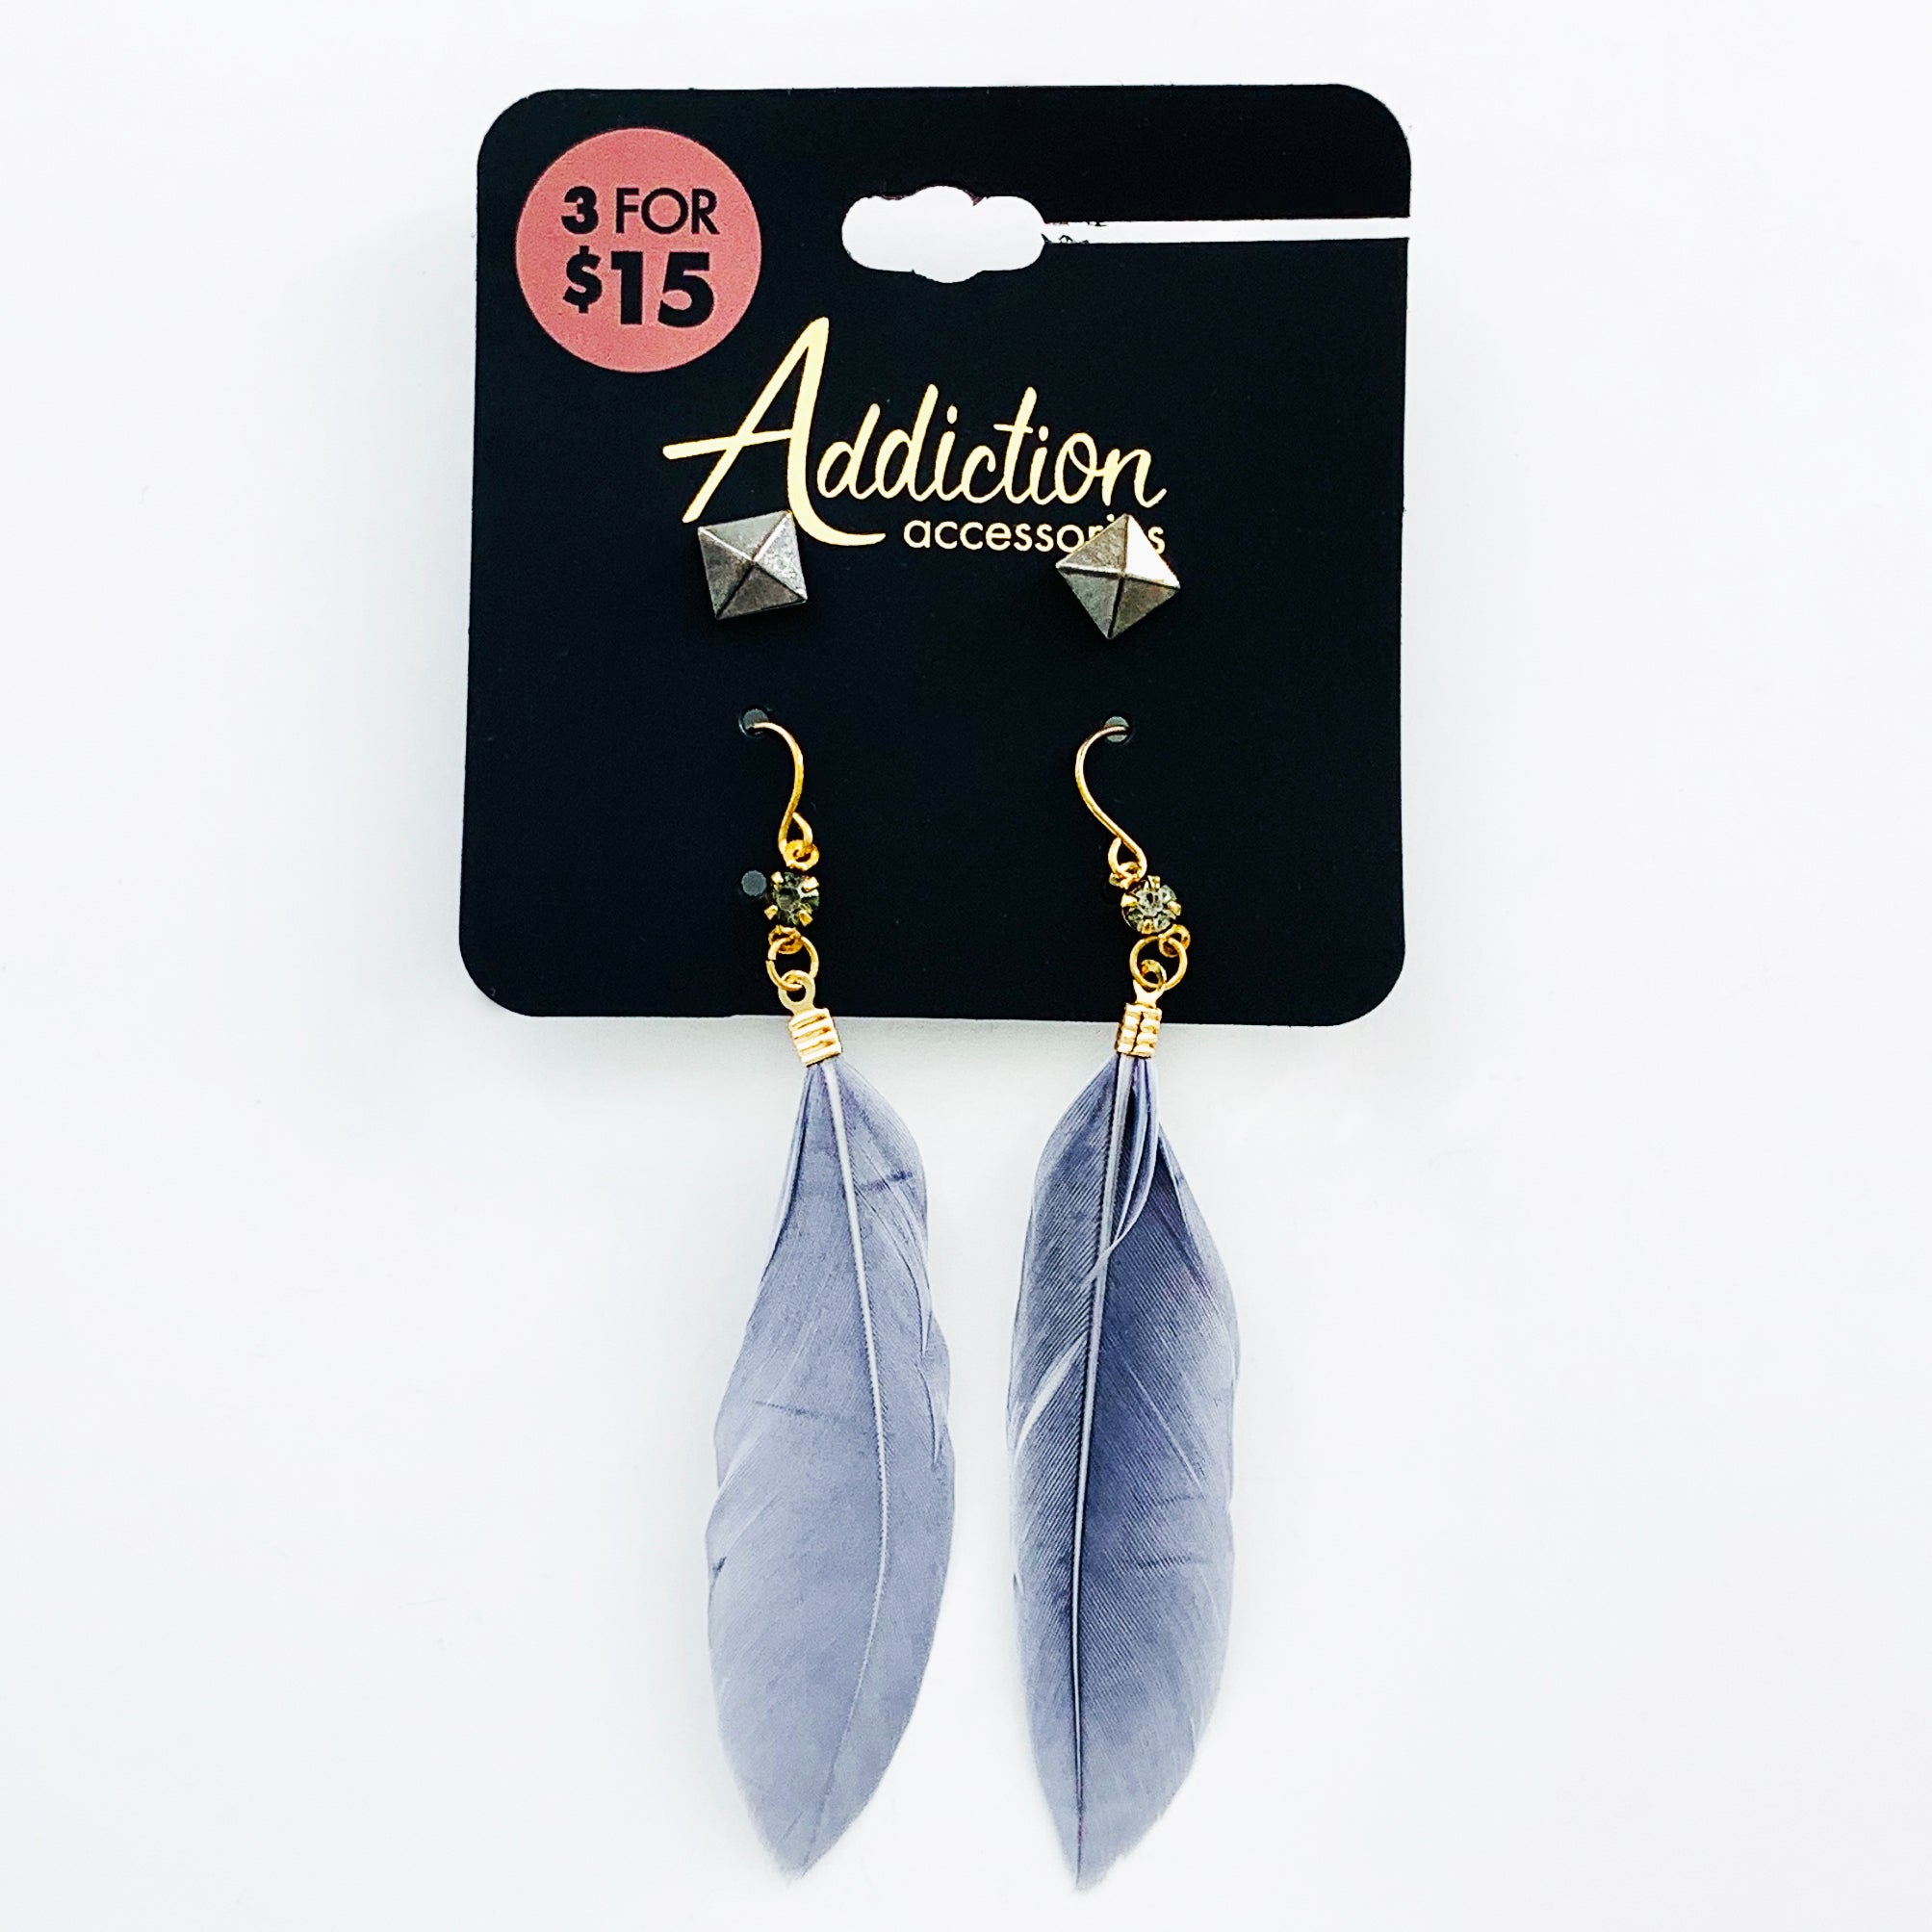 Dangling earrings with grey feathers